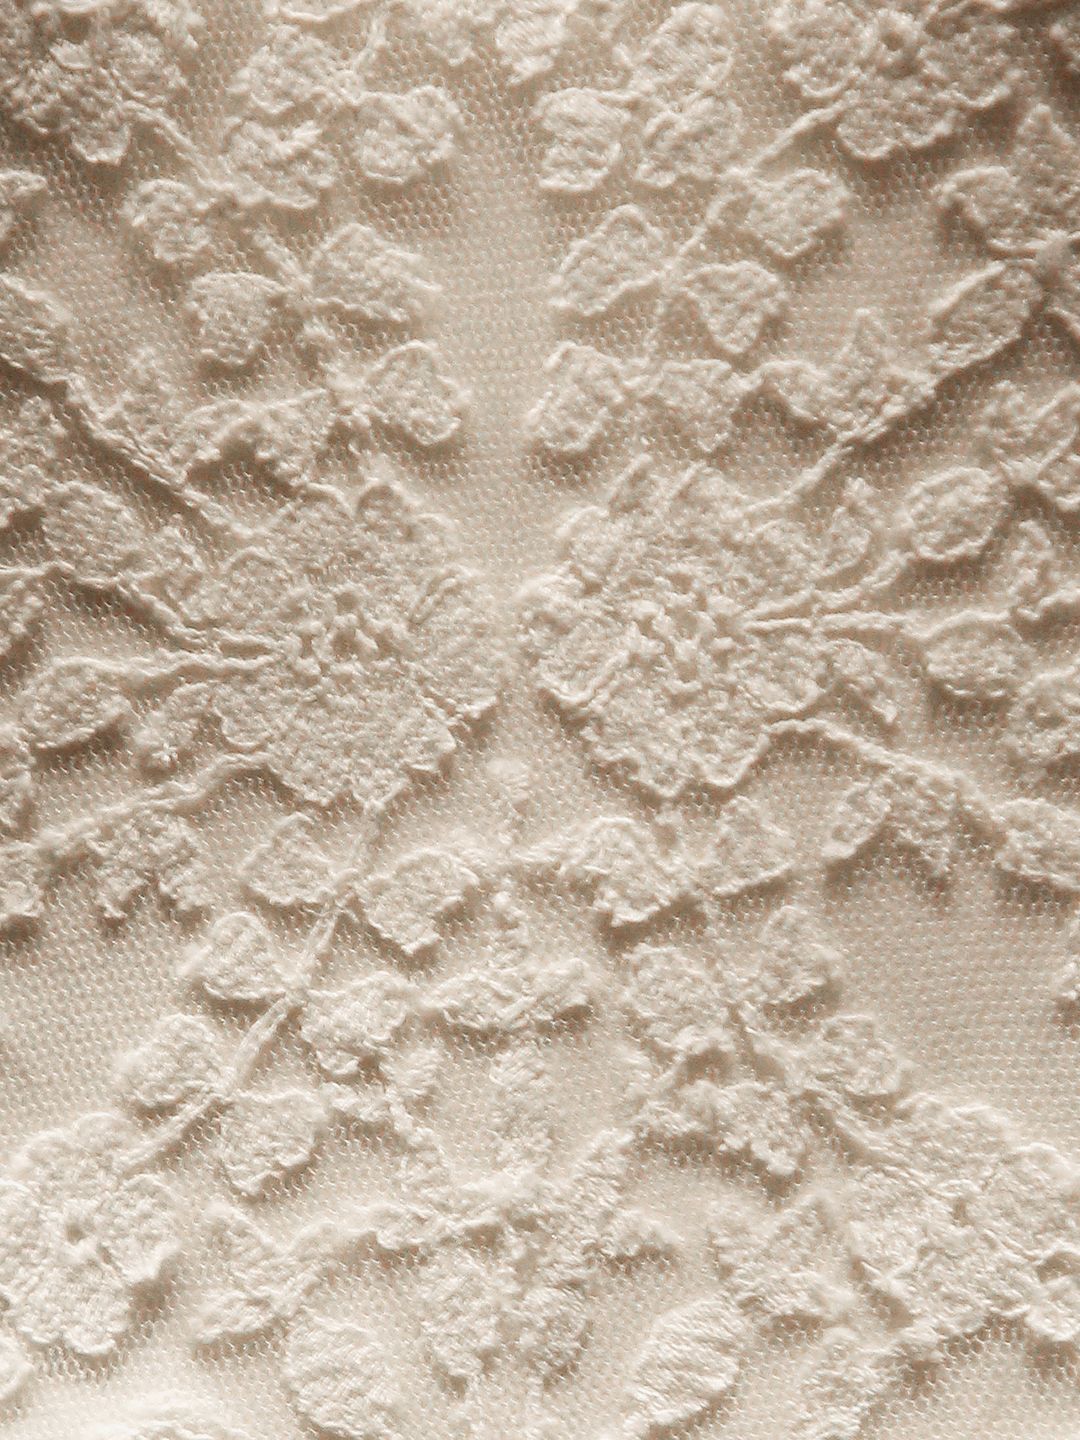 A close-up of the floral detailing in the dress